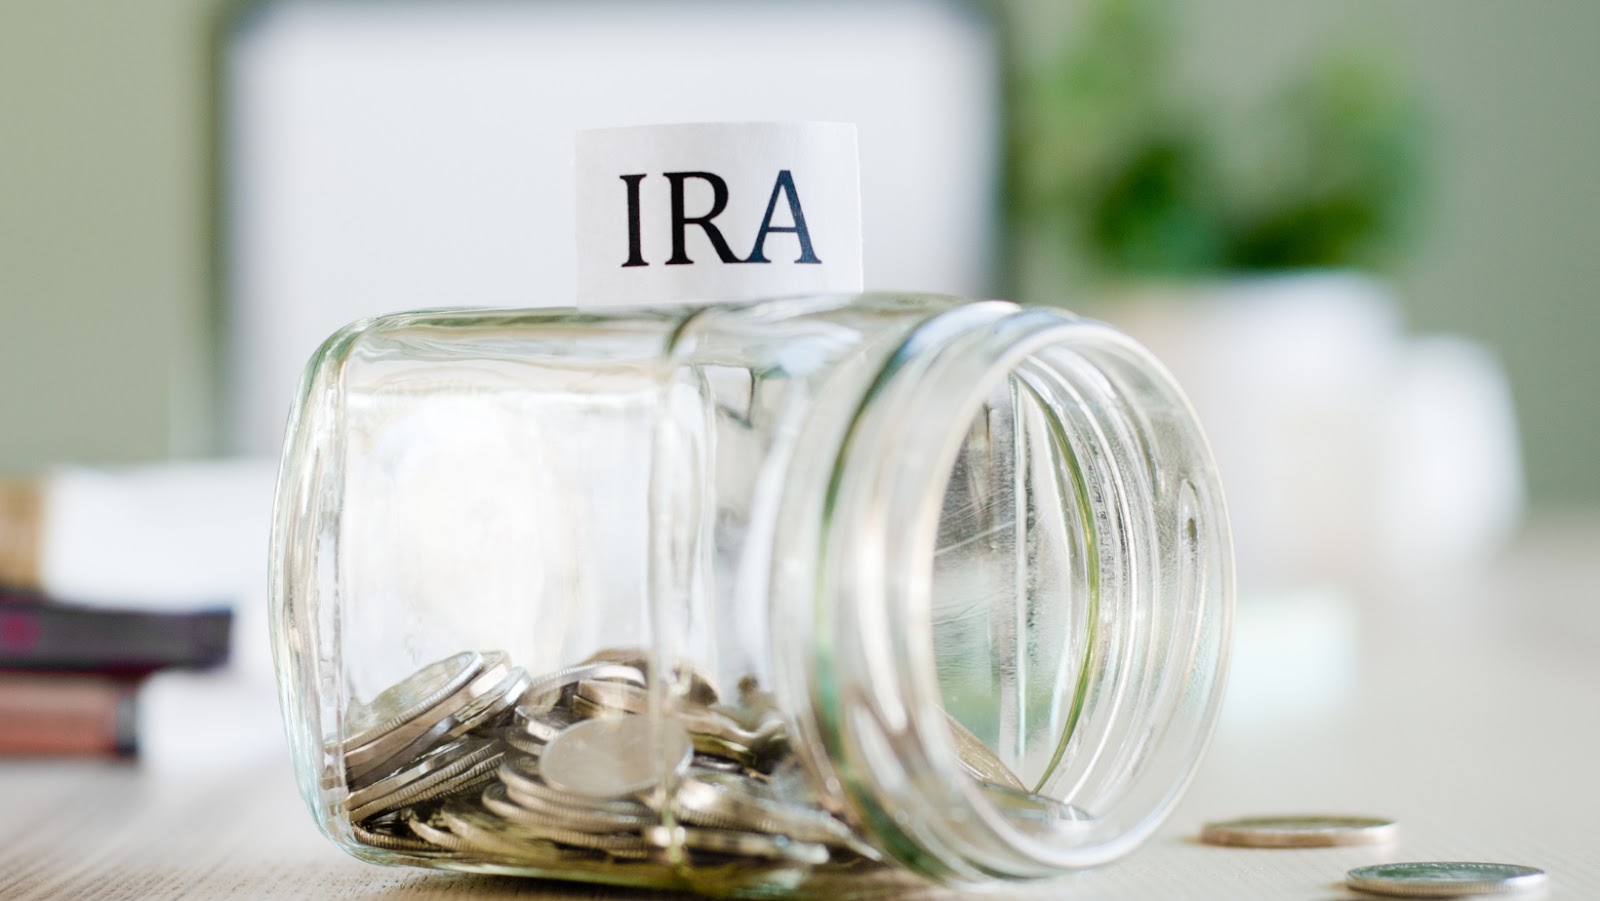 a multi-generational ira allows one to pass down their ira wealth' to several generations